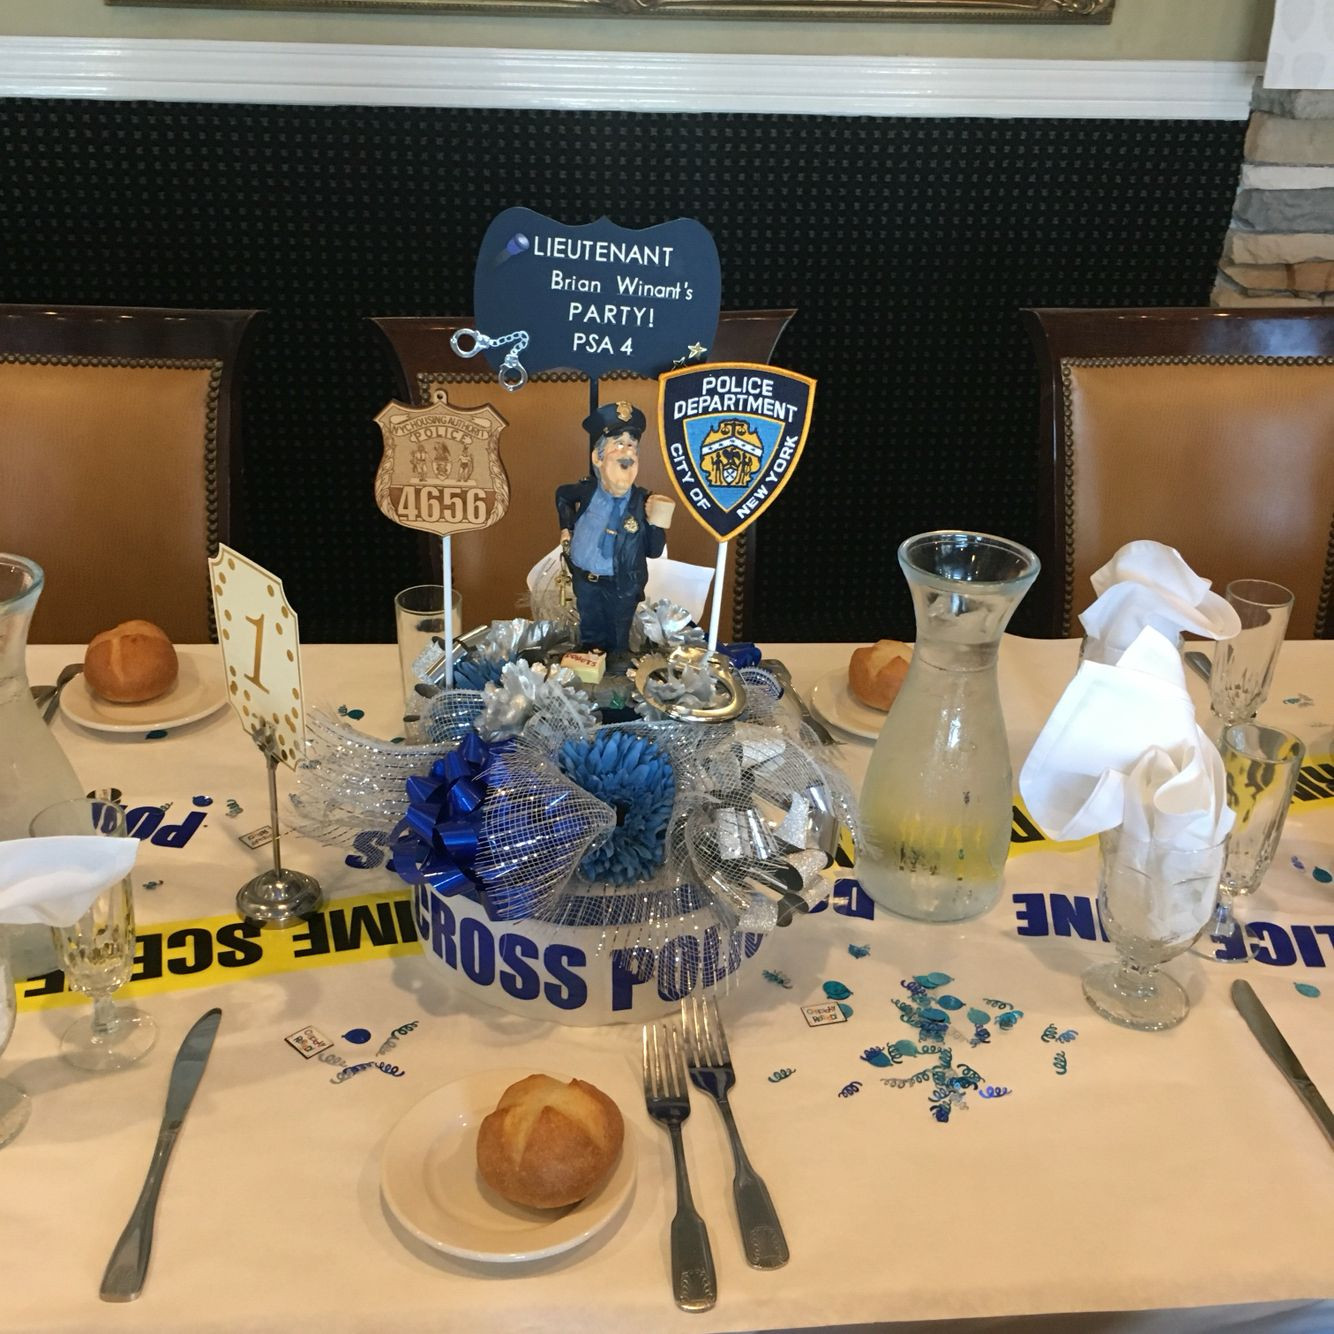 Centerpiece Ideas For Police Retirement Party
 Pin by Yelena W on Police retirement party DIY